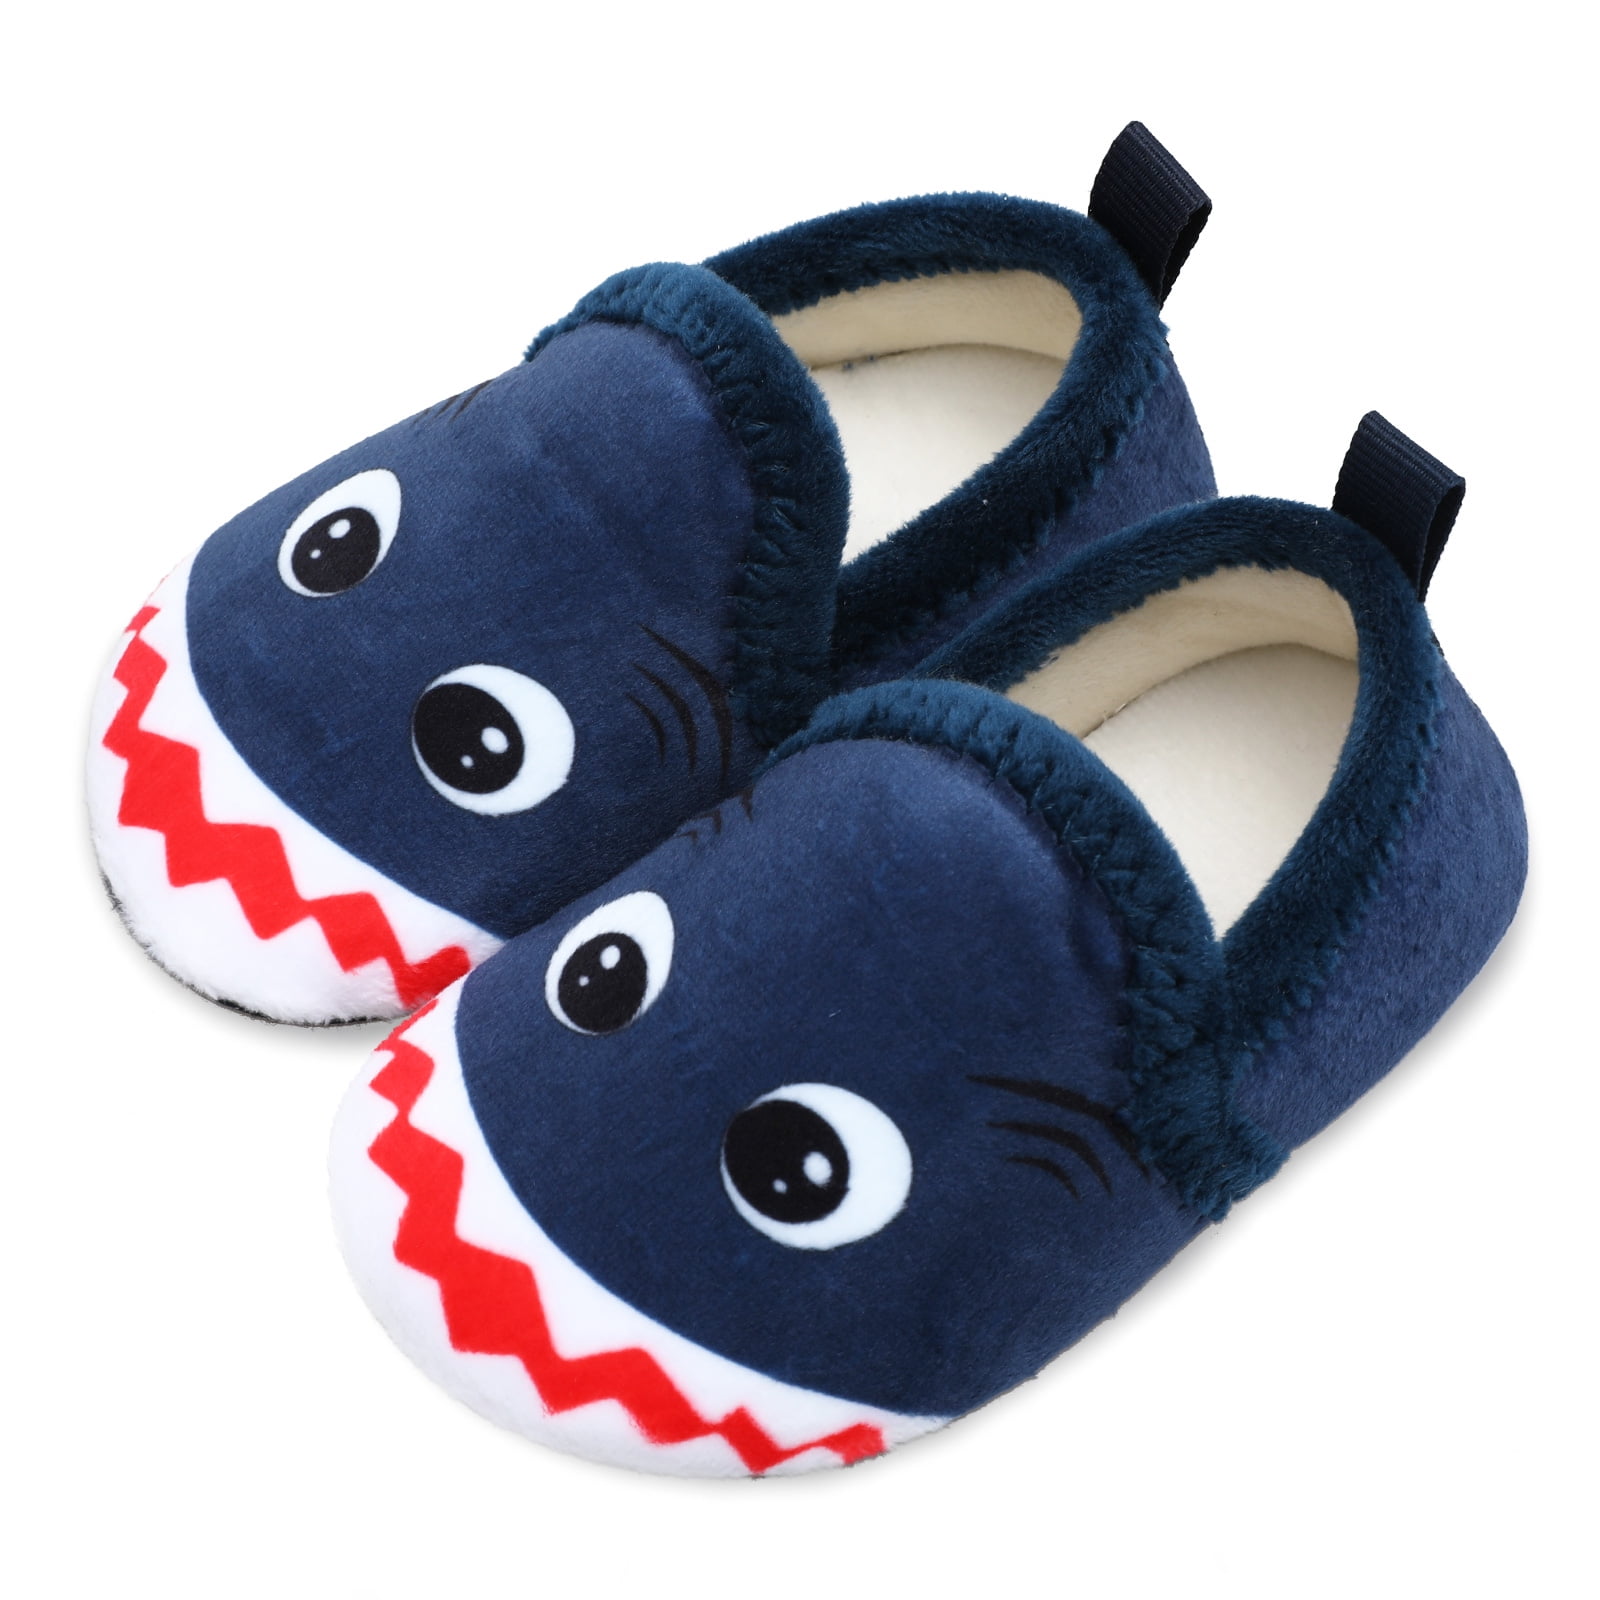 seannel Kids Cartoon Plush Slippers Boys and Girls Cozy Memory Foam Slip-on Toddler House Shoes Bedroom Indoor Outdoor 